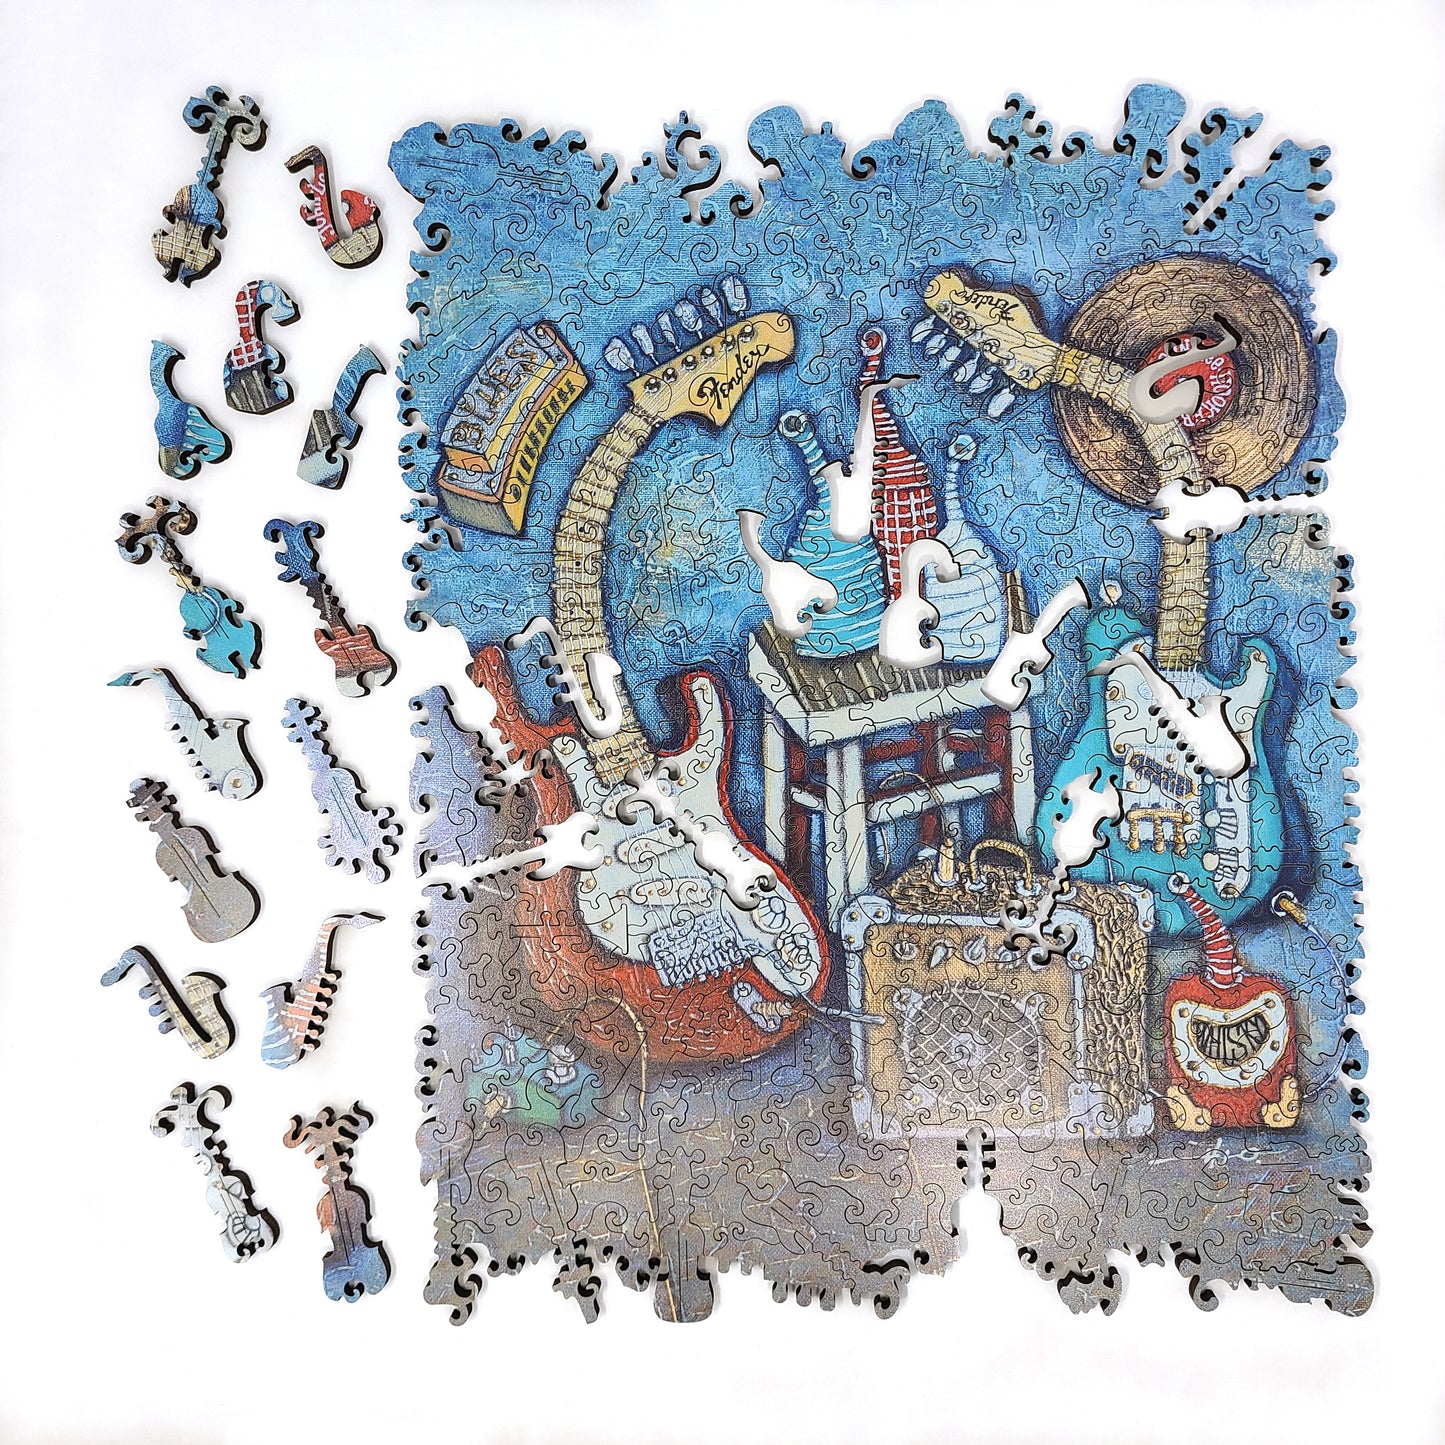 Large Format Wooden Jigsaw Puzzle with Uniquely Shaped Pieces for Seniors and Adults - 212 Pieces - Blue Bottle Blues